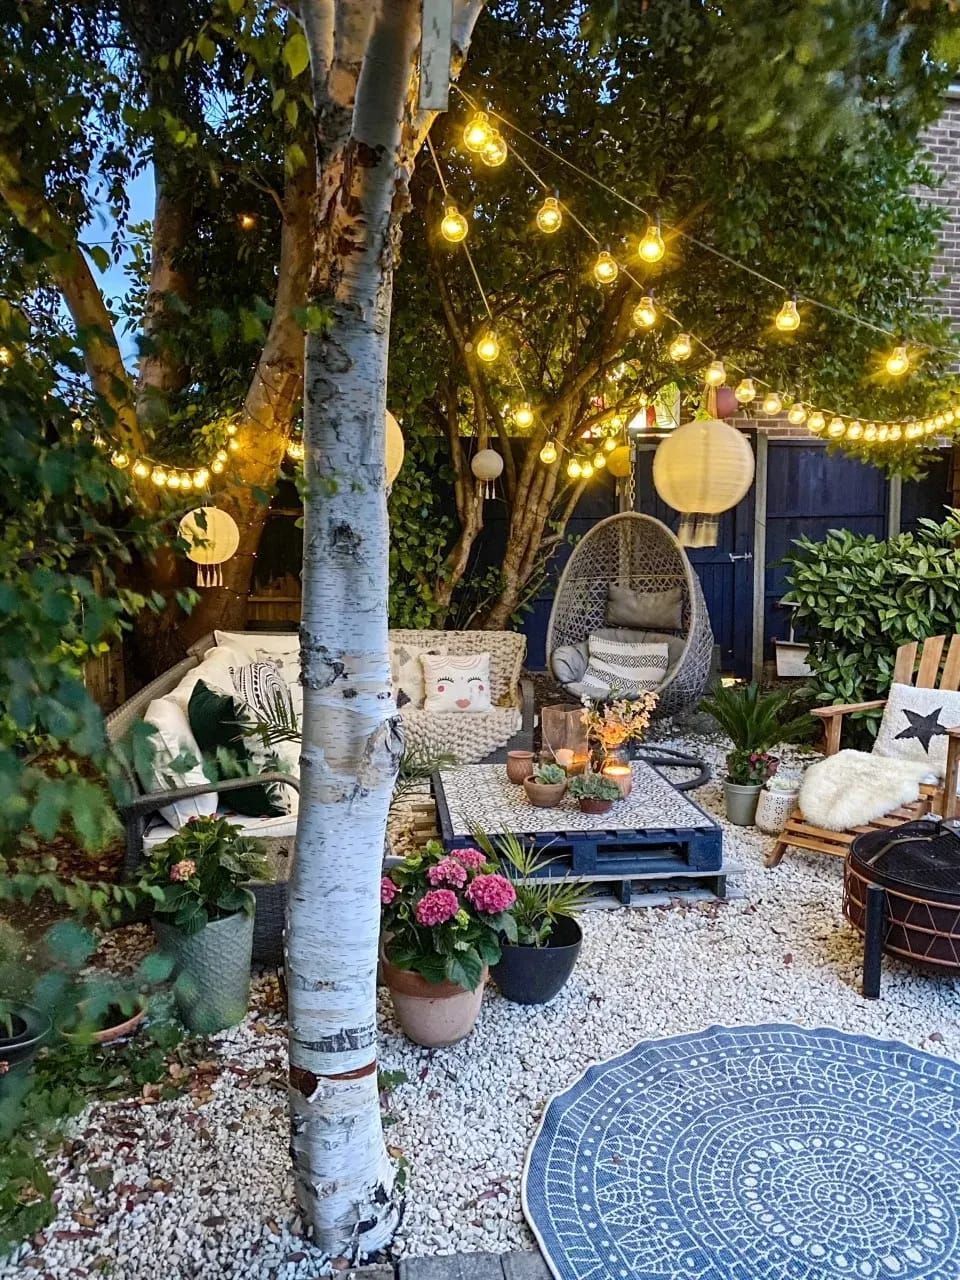 Creating a Cozy Oasis in Your Tiny Outdoor Space